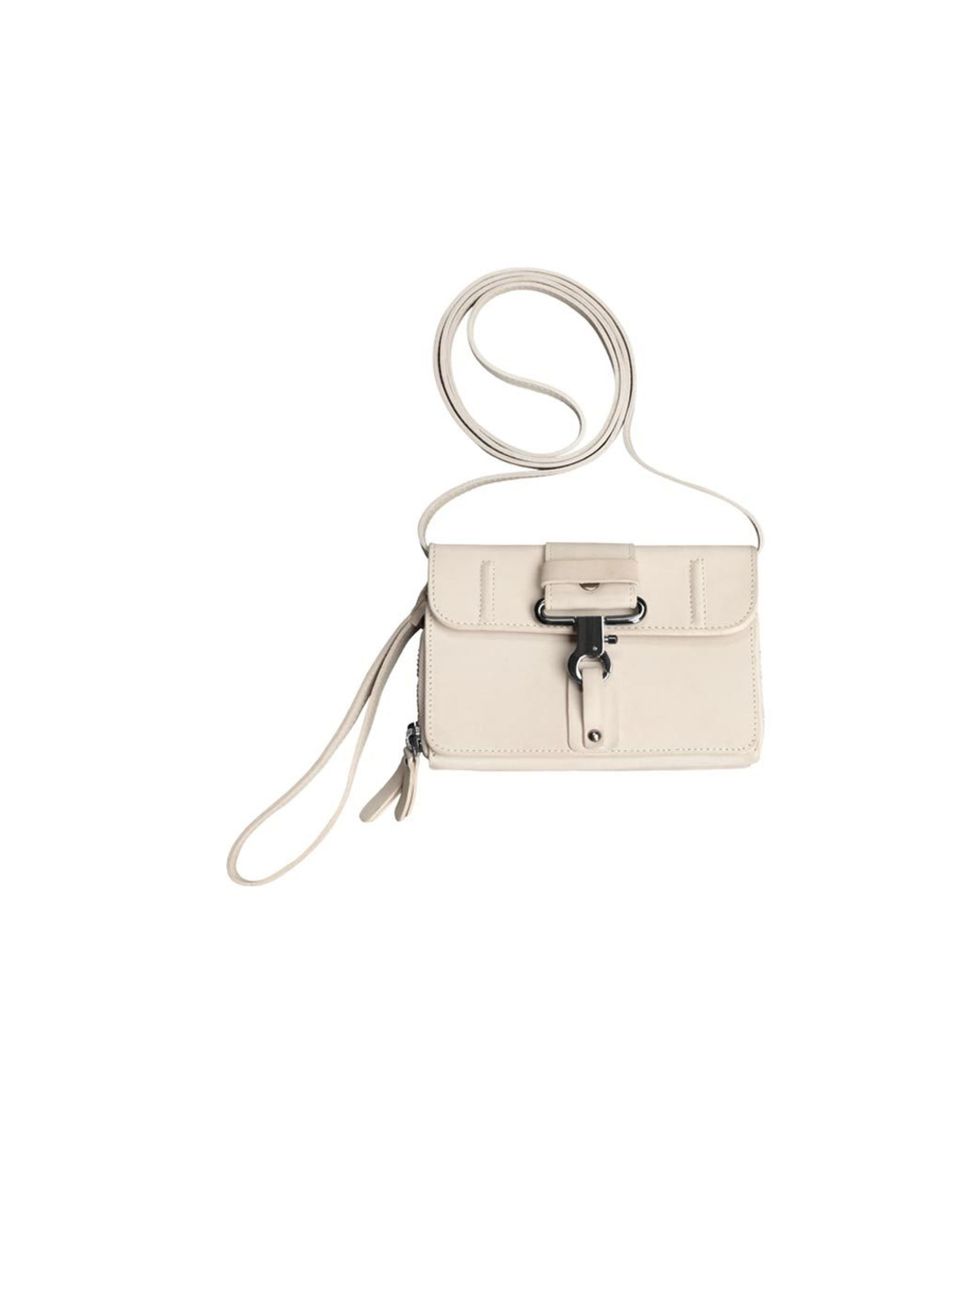 <p>A satchel is the perfect addition to your accessories arsenal - wear on the shoulder off-duty and across the body when you're on the festival fields, <a href="http://www.stories.com/New_in/All_new_in/Susan_Ibrahim_leather_shoulder_bag/591727-674472.1">